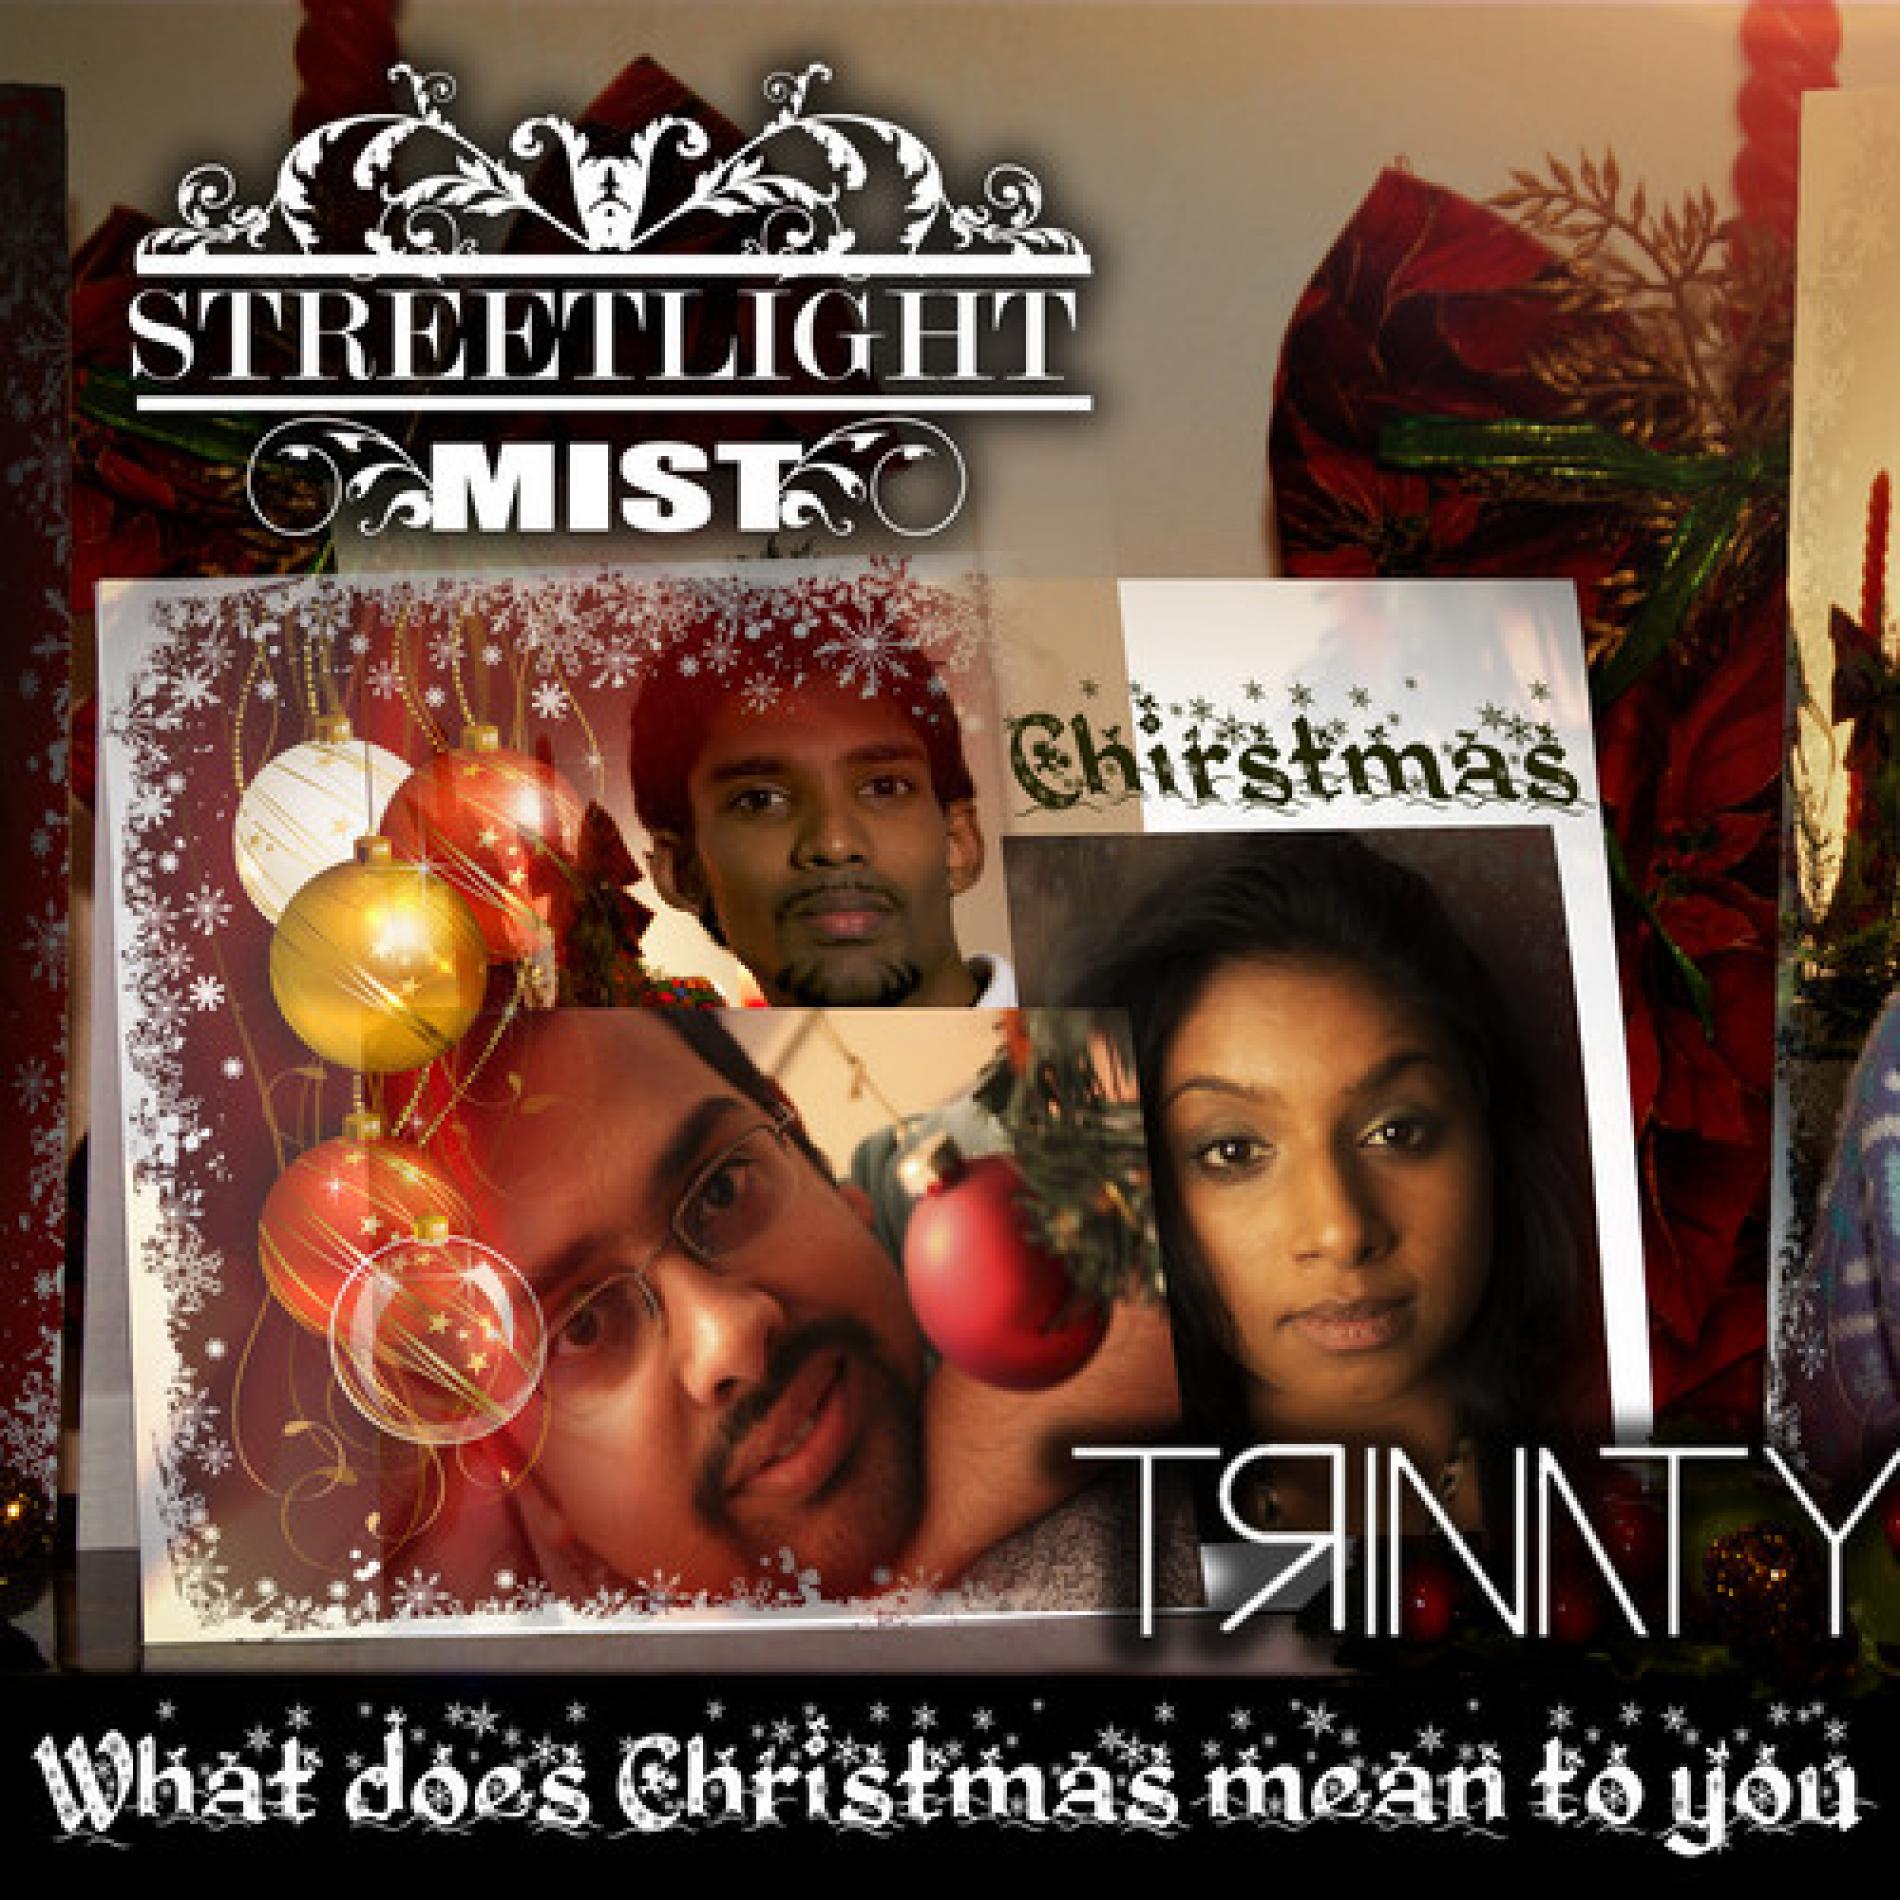 Street Light Mist & Trinaty Have An Awesome Track This Season